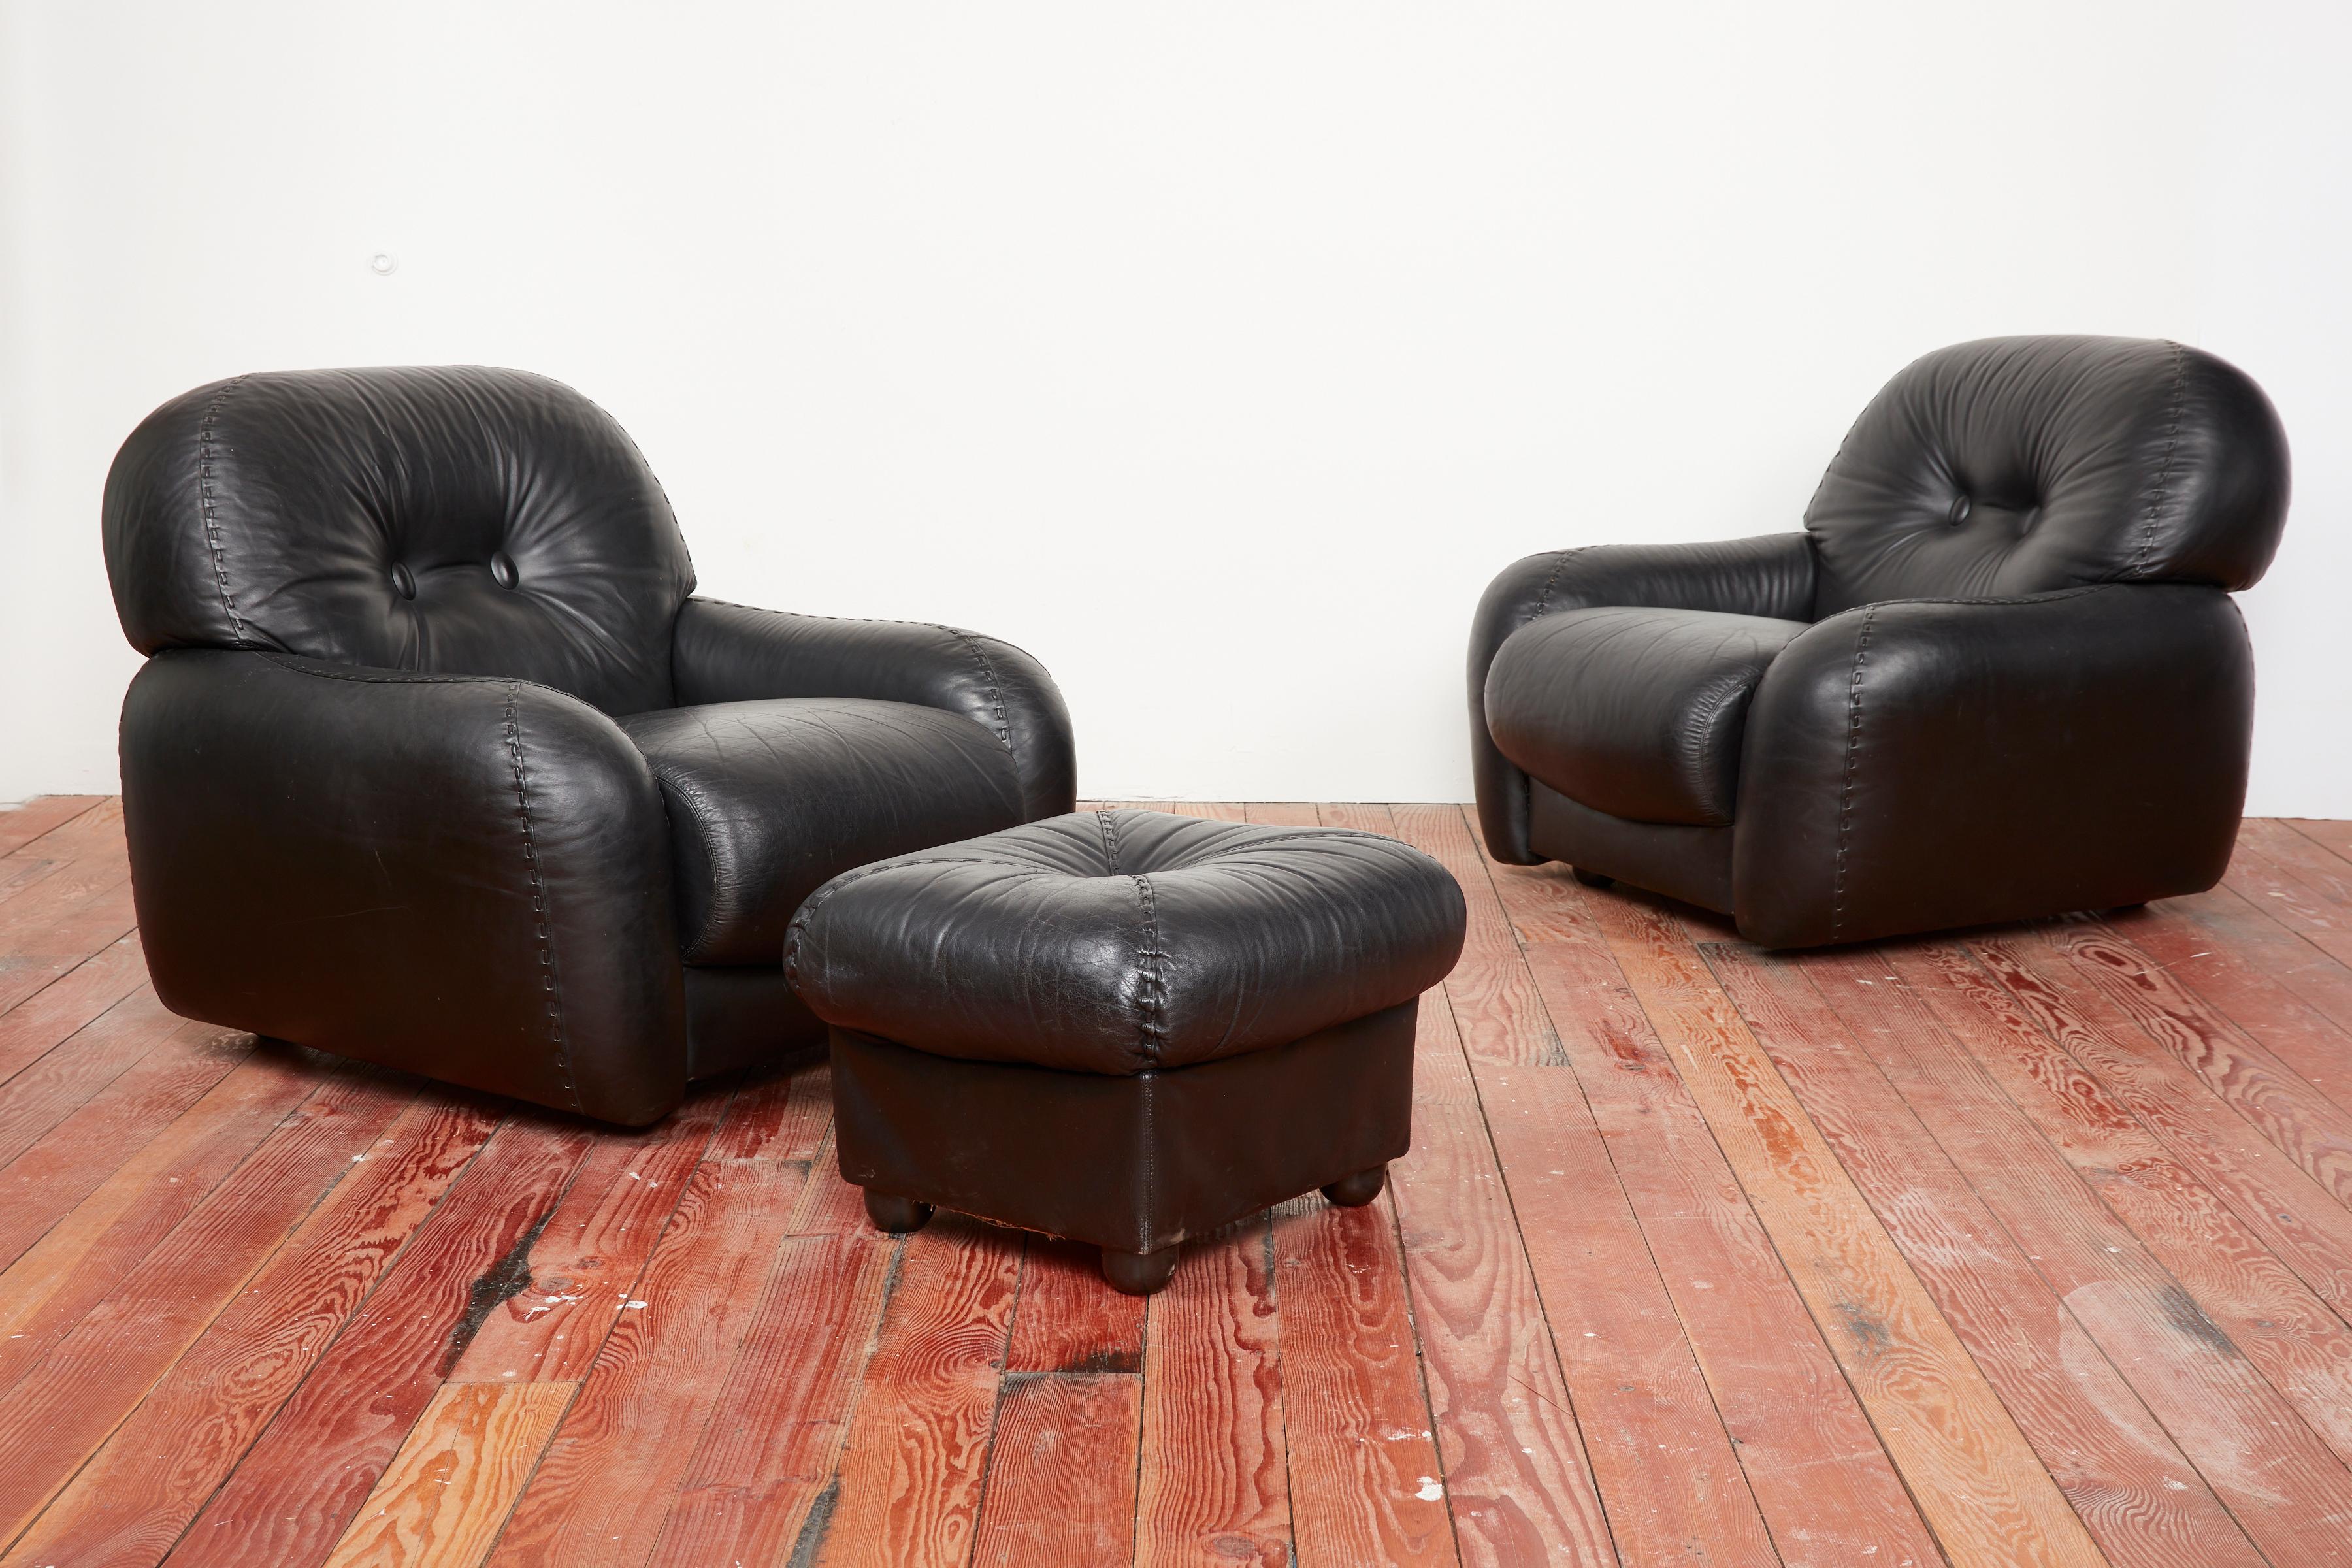 Italian leather club chairs by Adriano Piazzesi, circa 1960s. 
Great original soft black leather with signature baseball stitching detail. 

Part of a set with matching settee available. 

Perfect for a media room!